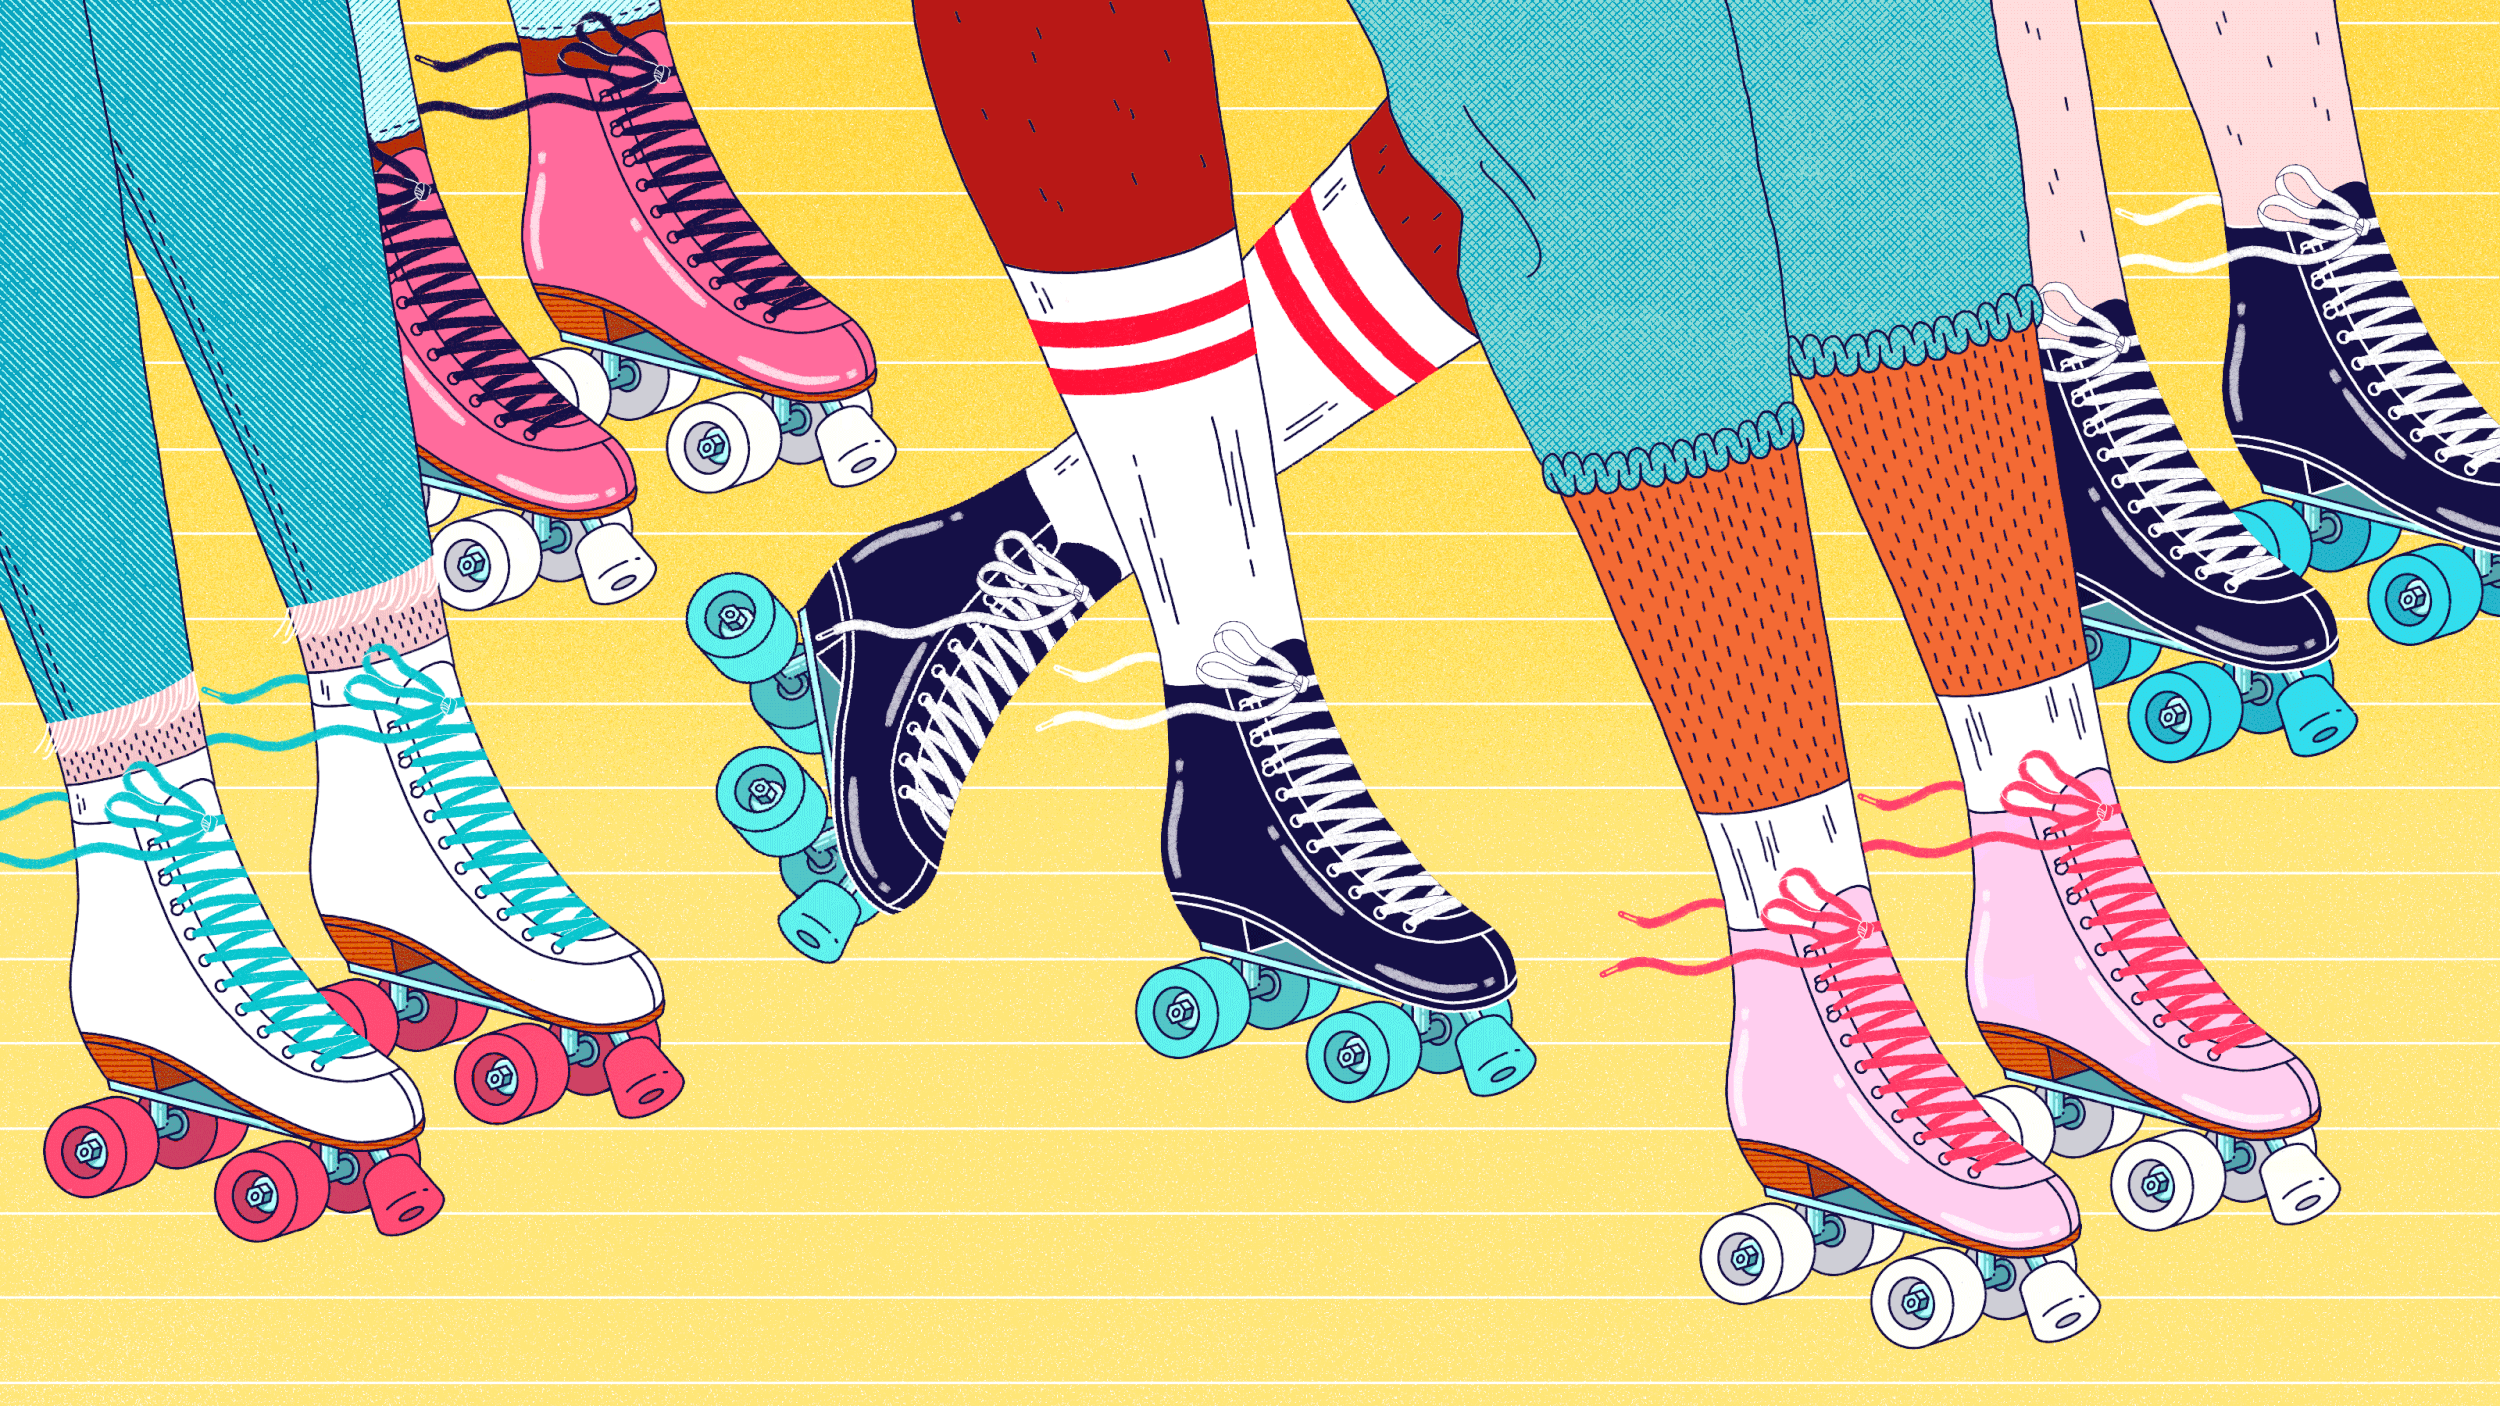   Full story:  Roller skating feels a lot like love, and falling is just part of the process   Illustration: Josie Norton for NPR  